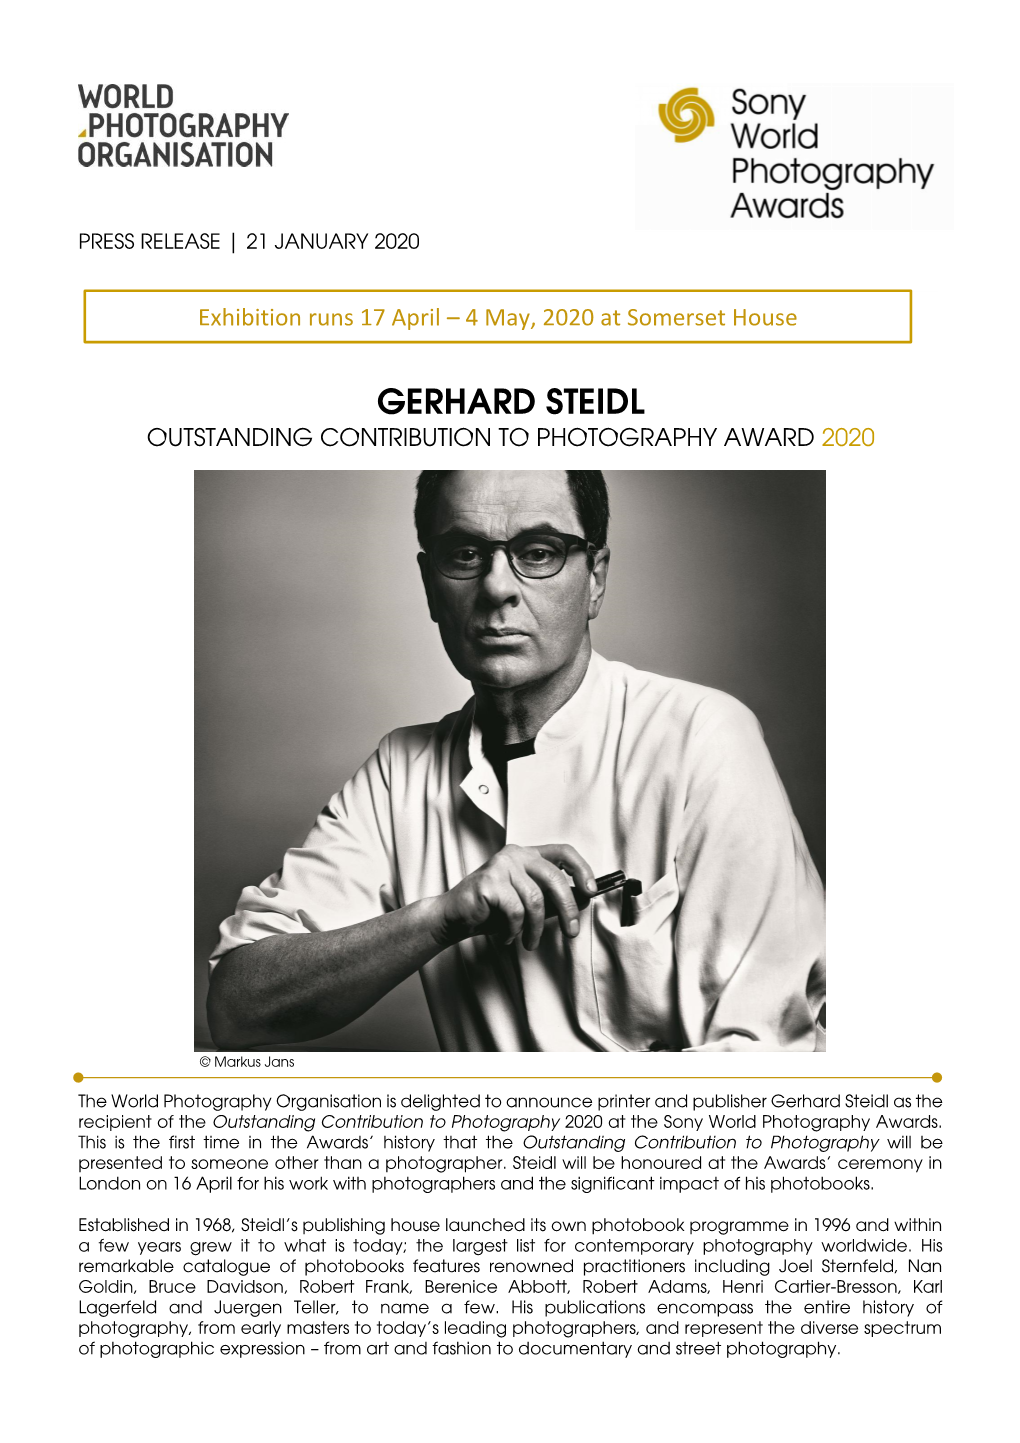 Gerhard Steidl Outstanding Contribution to Photography Award 2020